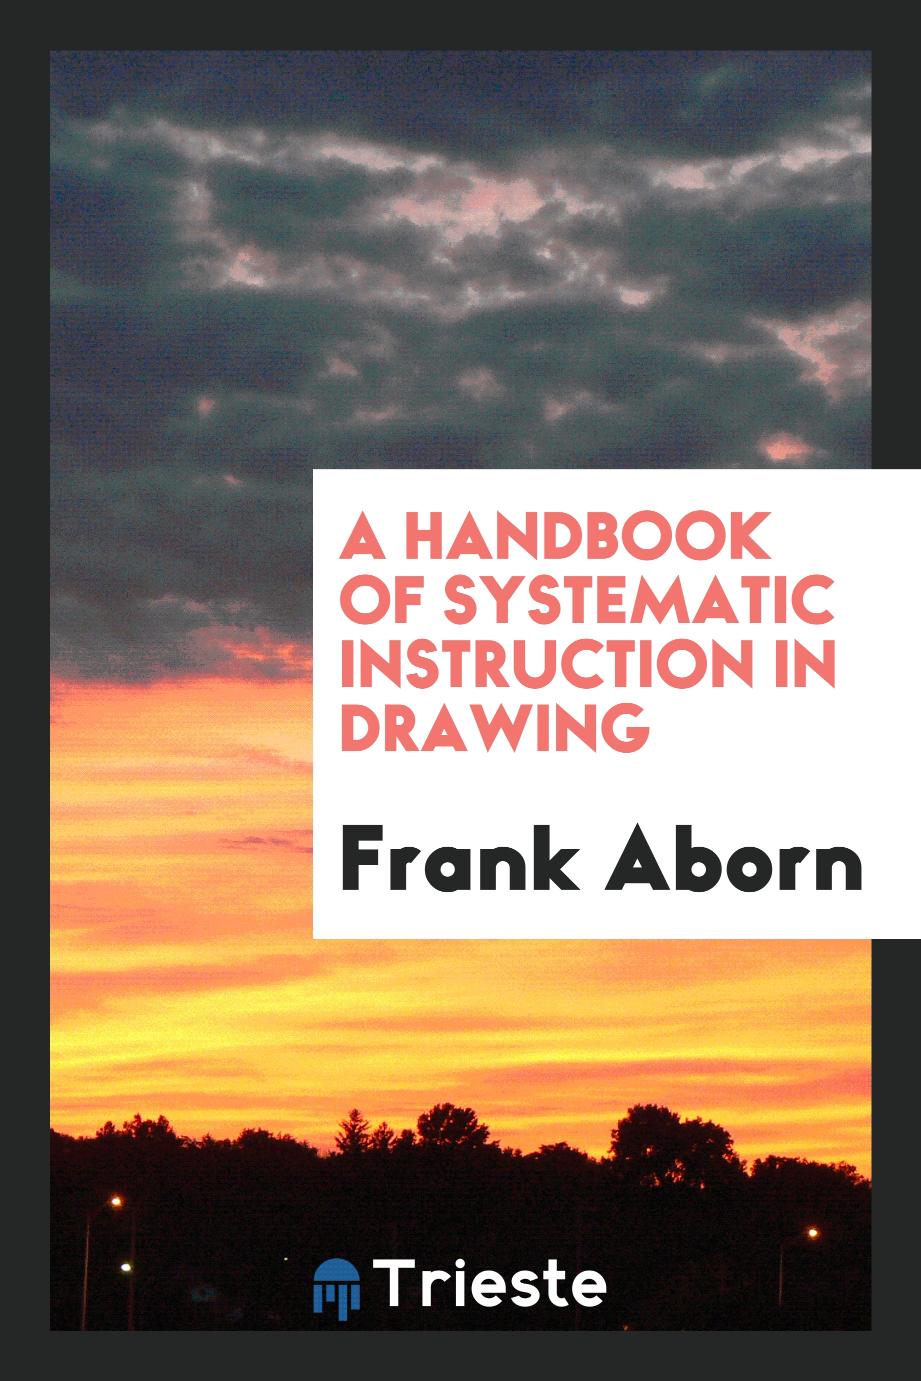 A Handbook of Systematic Instruction in Drawing